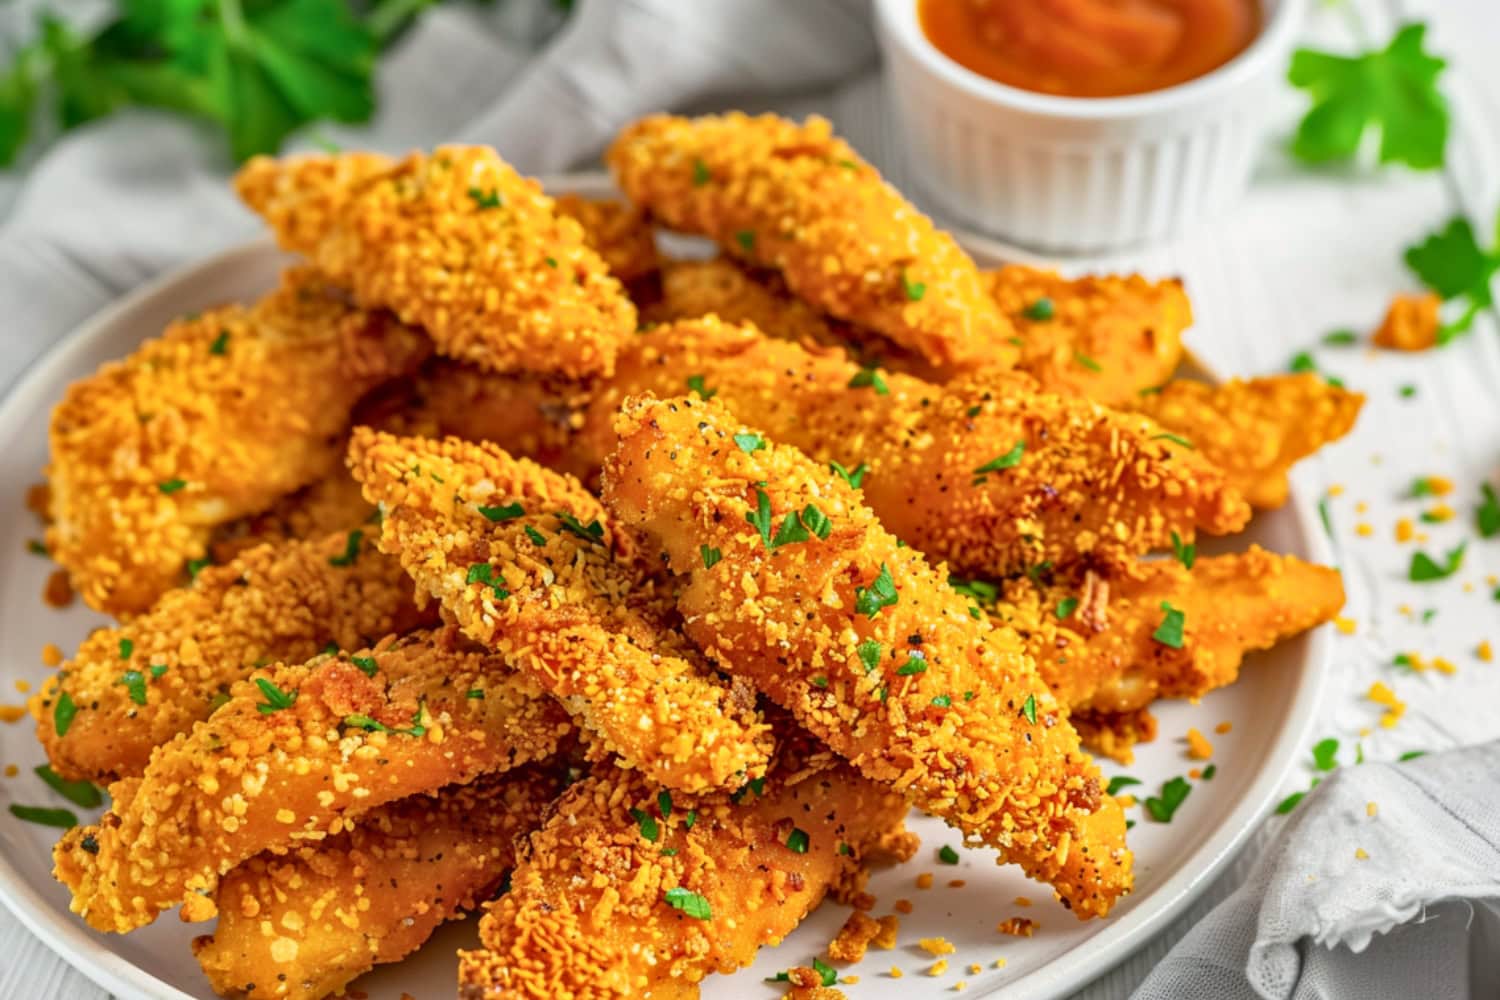 Bunch of chicken tenders coated in cornflakes arranged in a white plate.